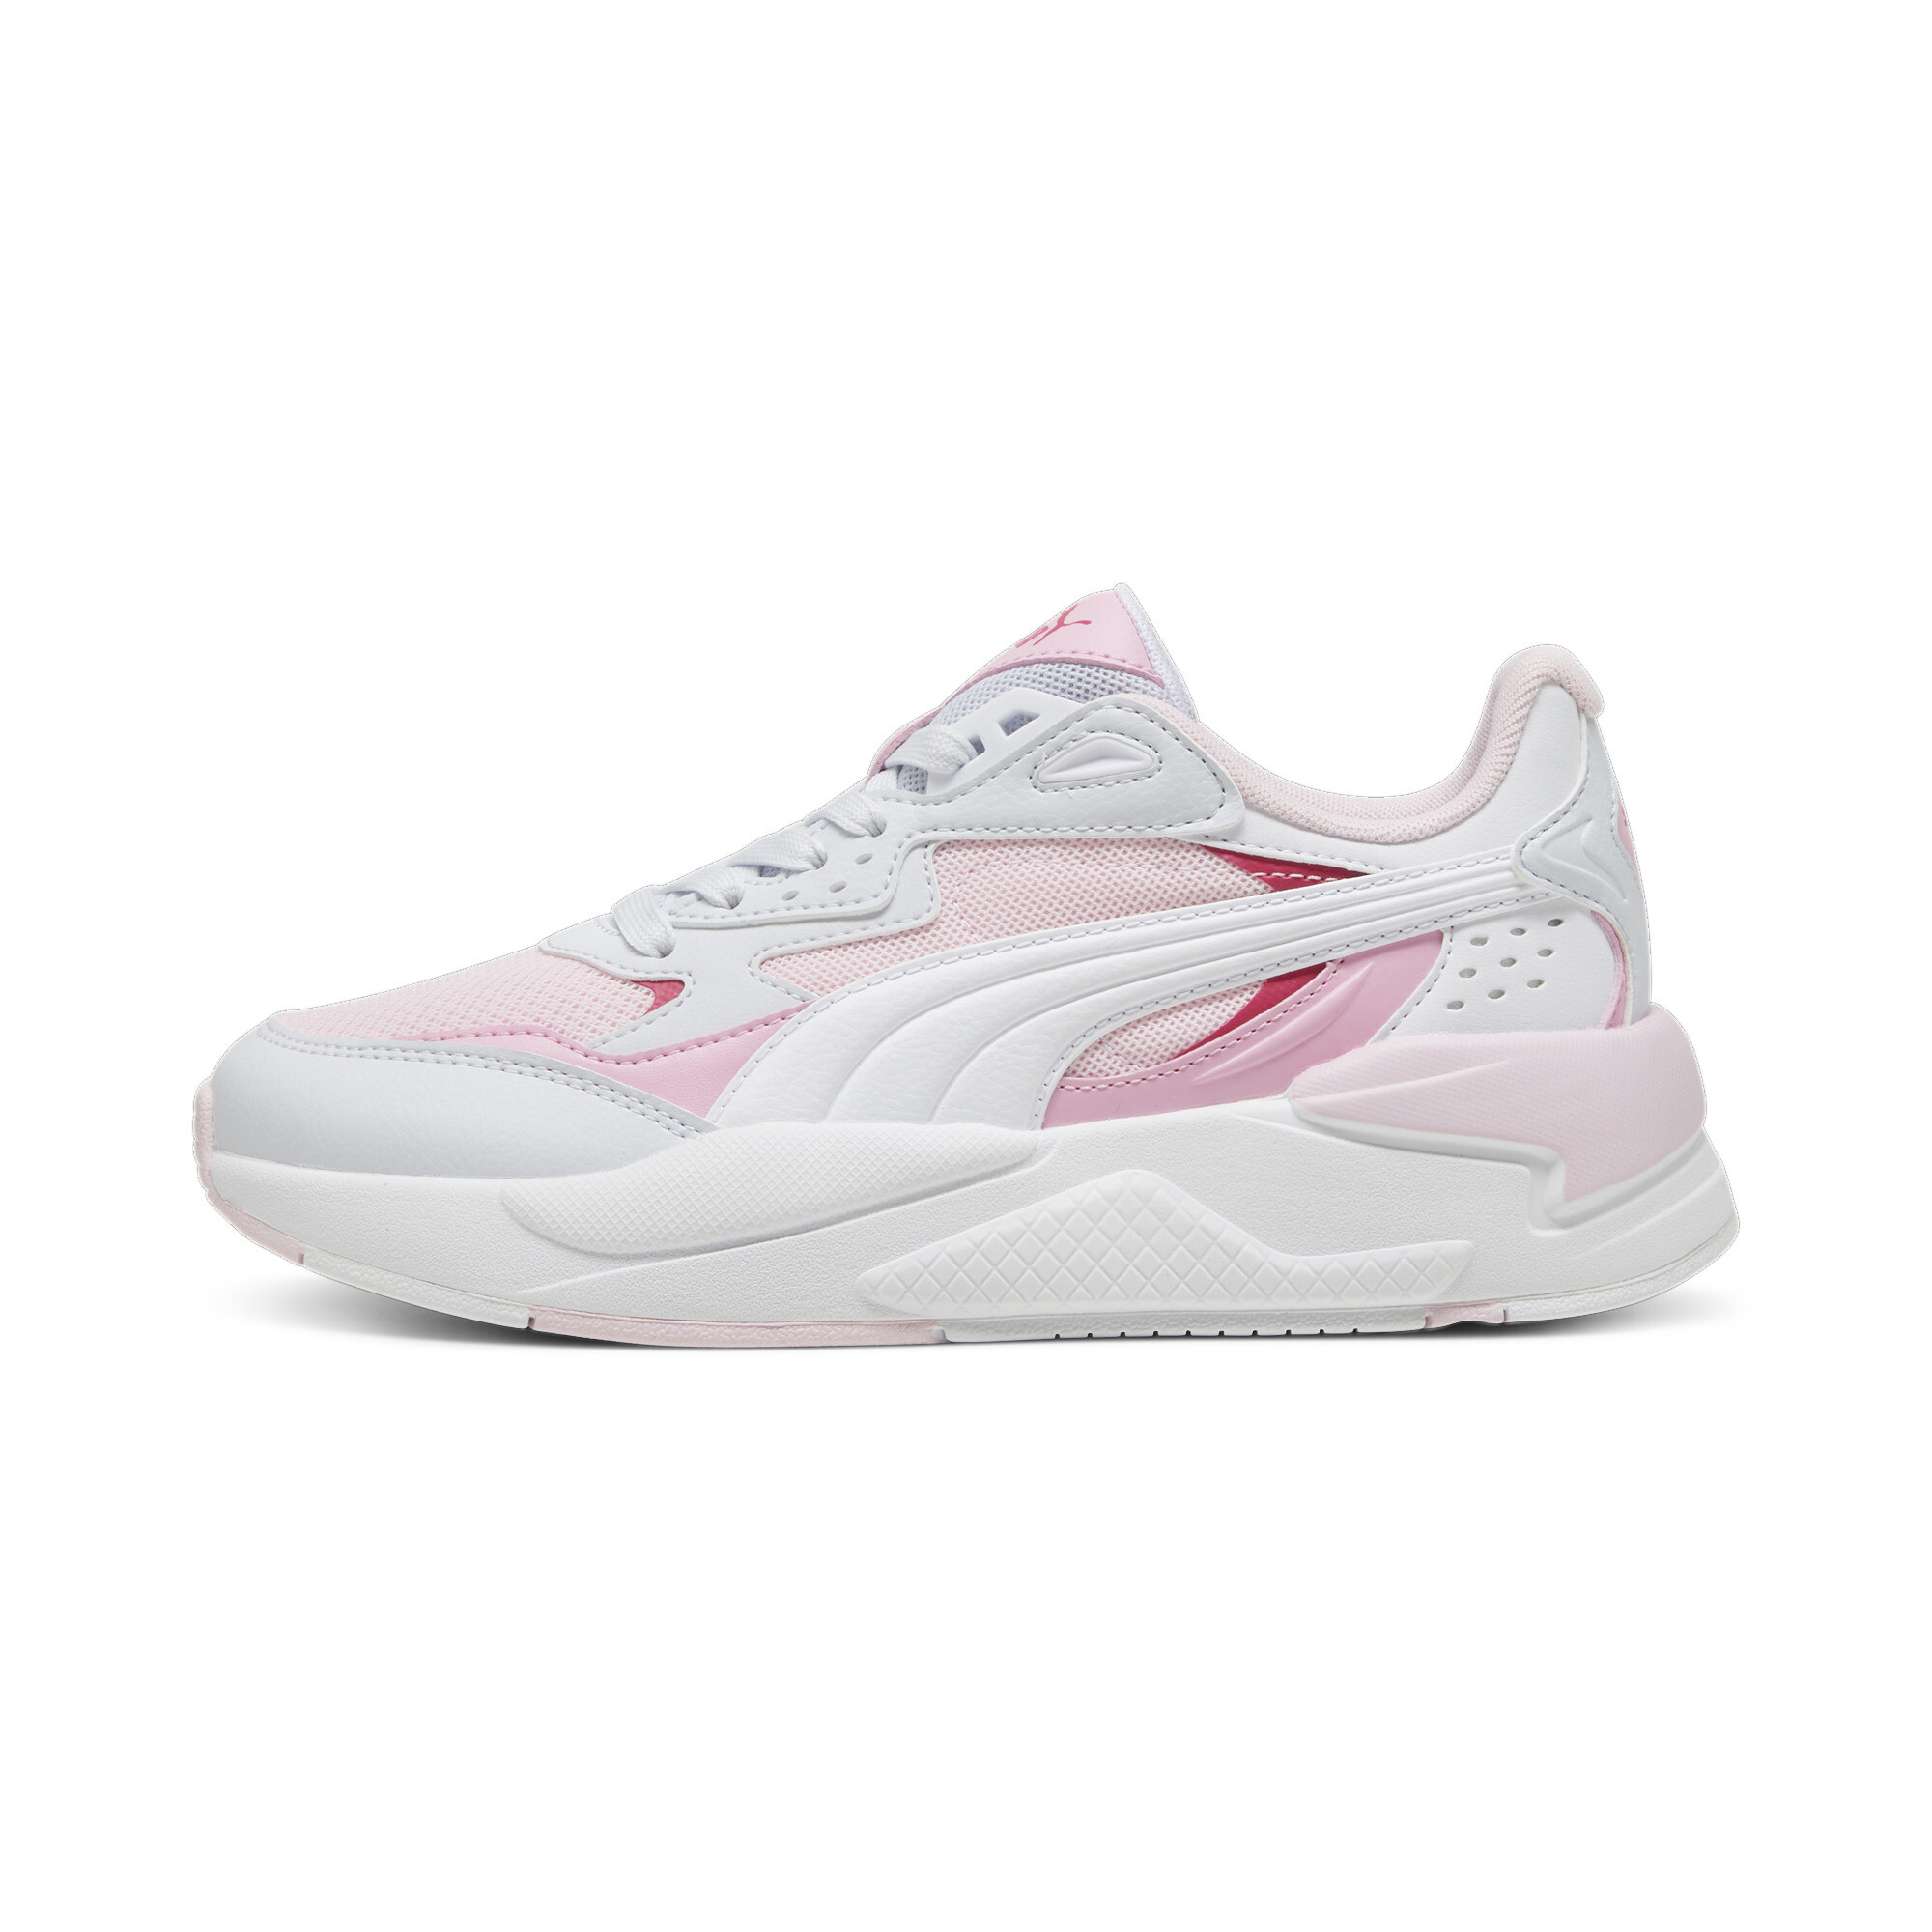 Puma X-Ray Speed Youth Trainers, Pink, Size 38, Shoes